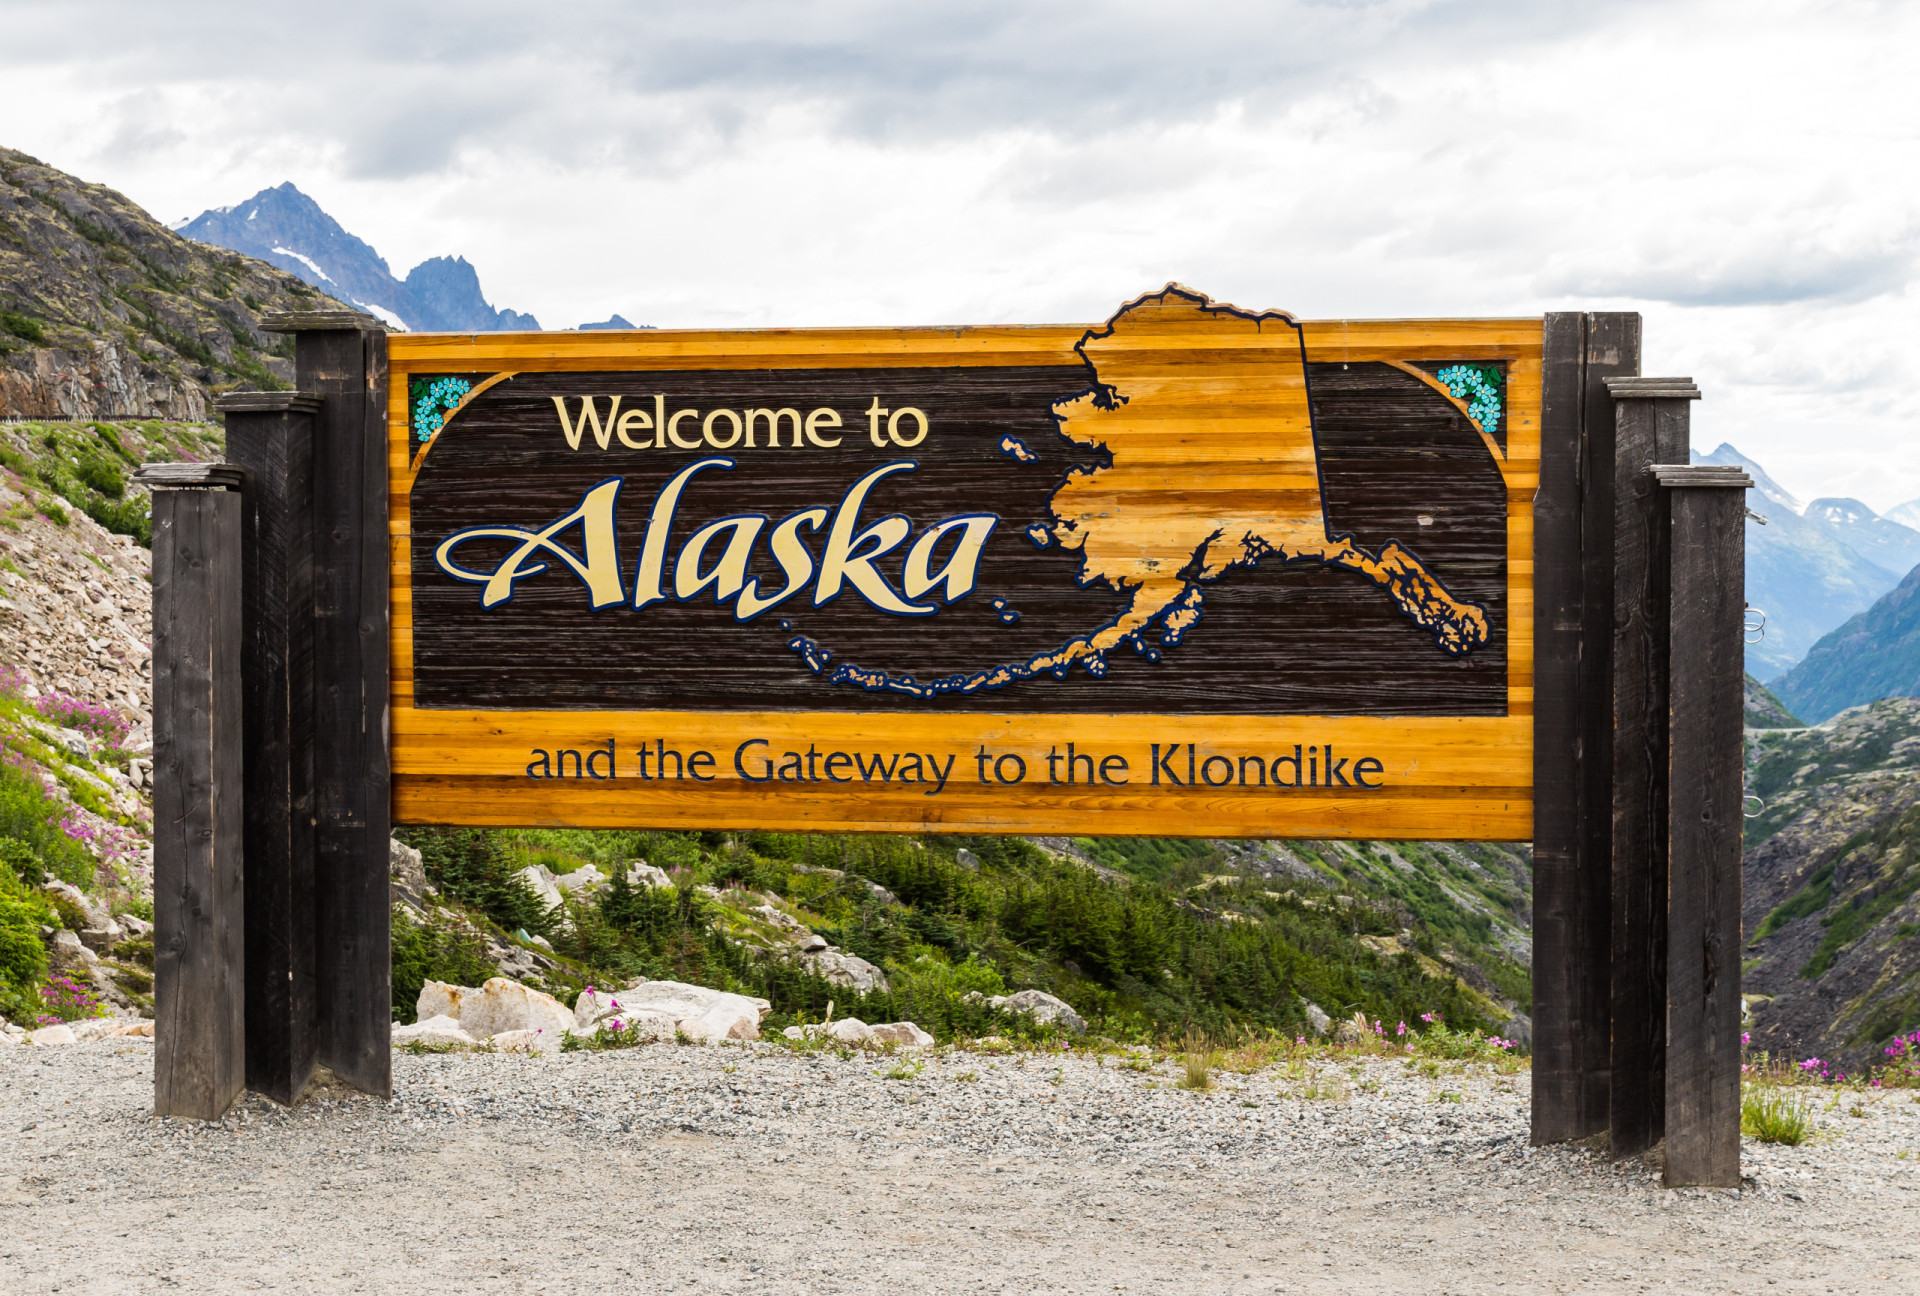 <p>This Alaska welcome sign features a map as well as a refence to the Klondike-Alaska Gold Rush. The state is home to a plethora of natural wonders, including the historic Fortymile River Region and Denali, the tallest mountain in North America.</p><p>You may also like:<a href="https://www.starsinsider.com/n/164853?utm_source=msn.com&utm_medium=display&utm_campaign=referral_description&utm_content=572689en-en"> These actors were heartthrobs in their youth </a></p>